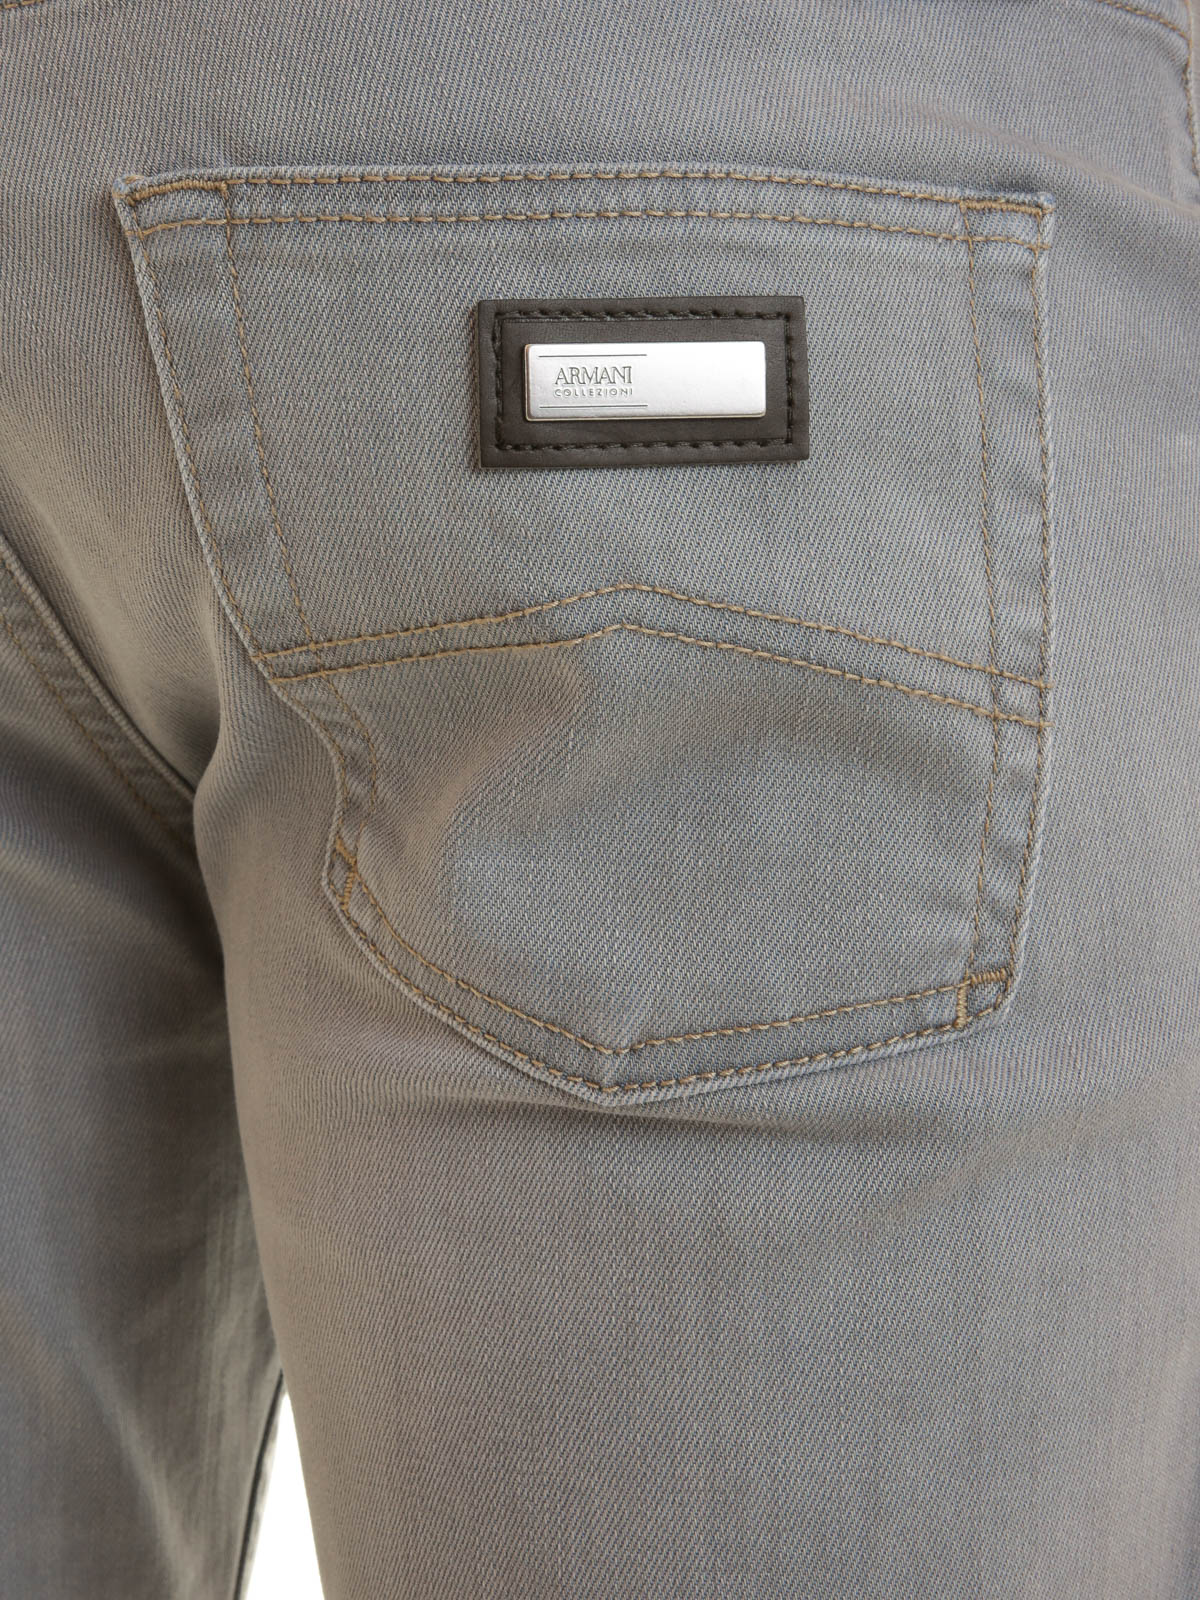 armani collection jeans